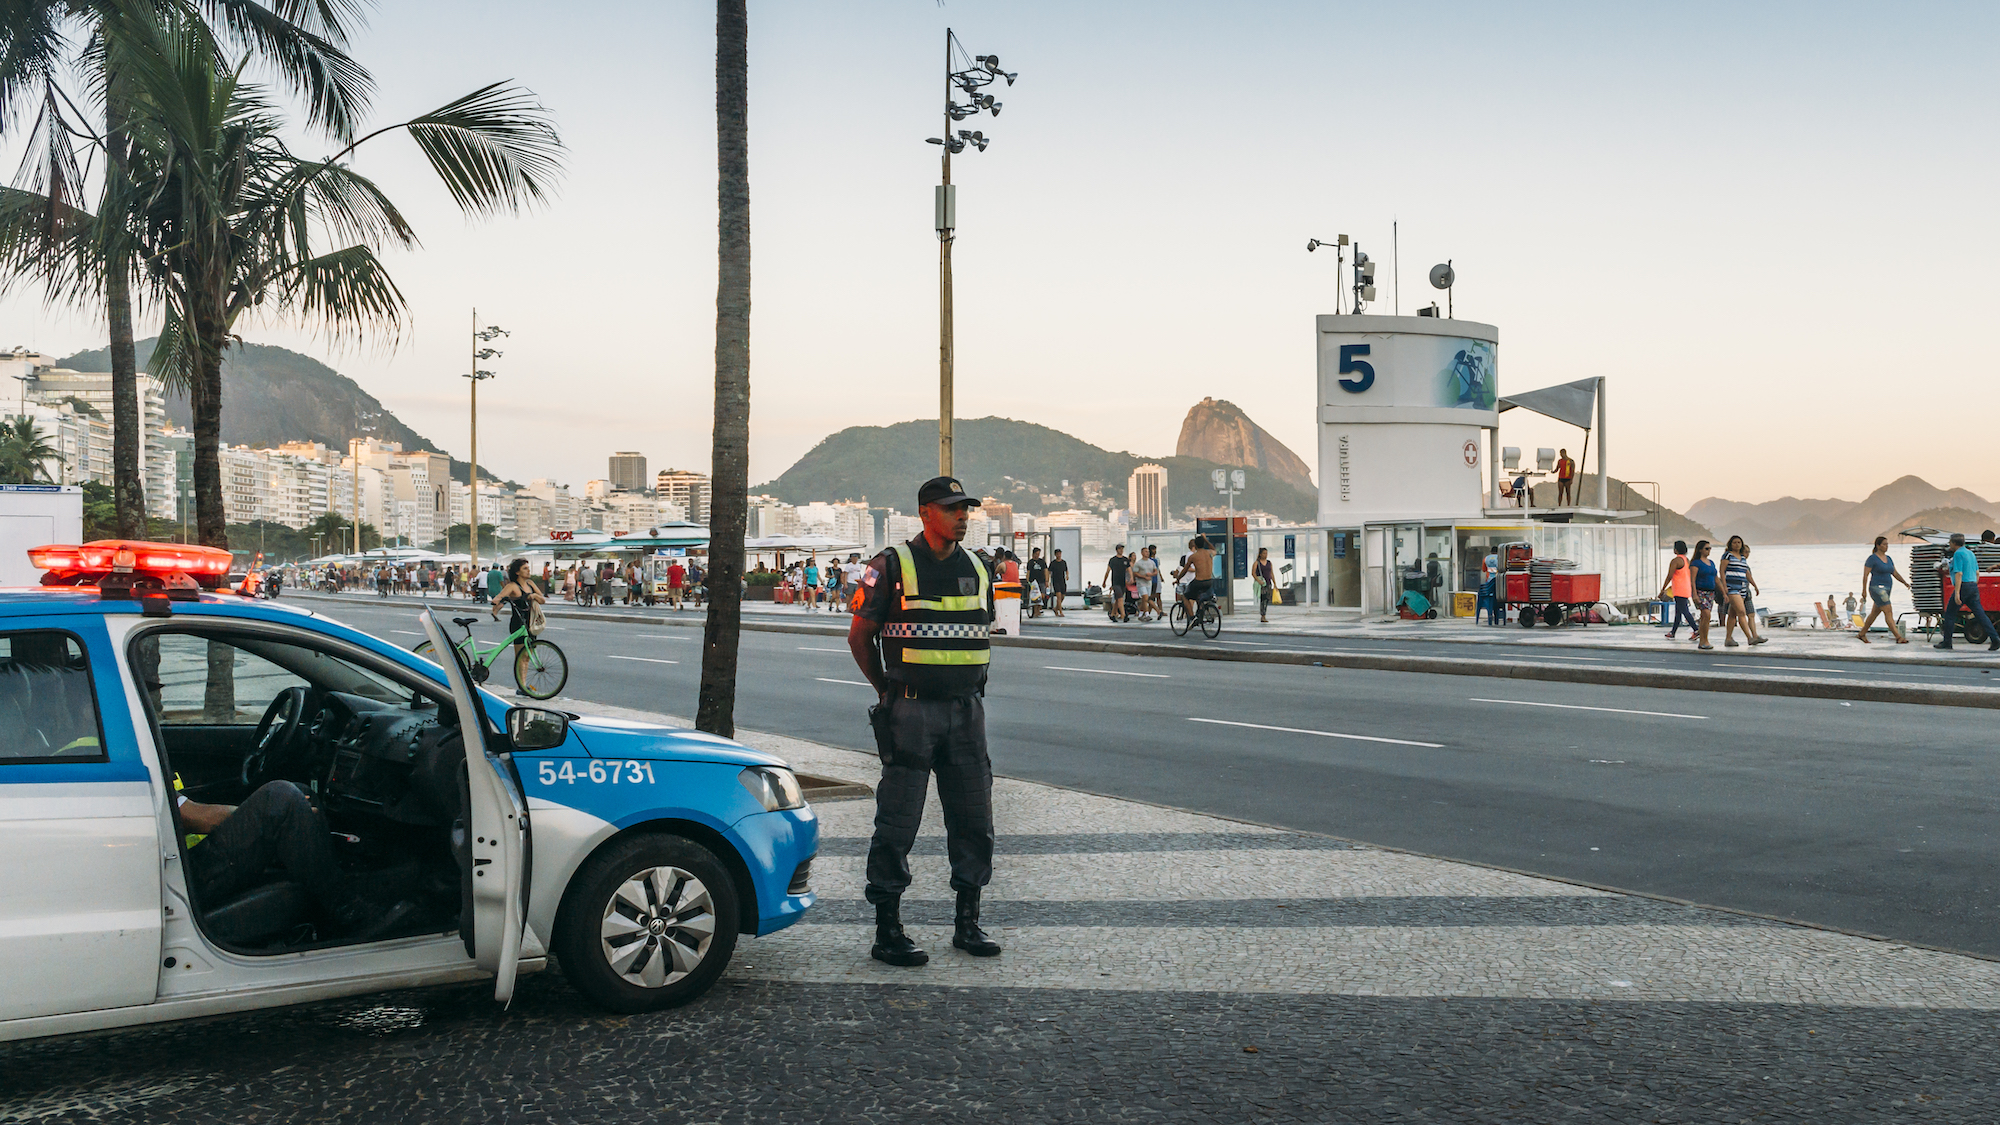 Police officer stands in front of his car on a street near the ocean boardwalk in Rio de Janeiro, Brazil